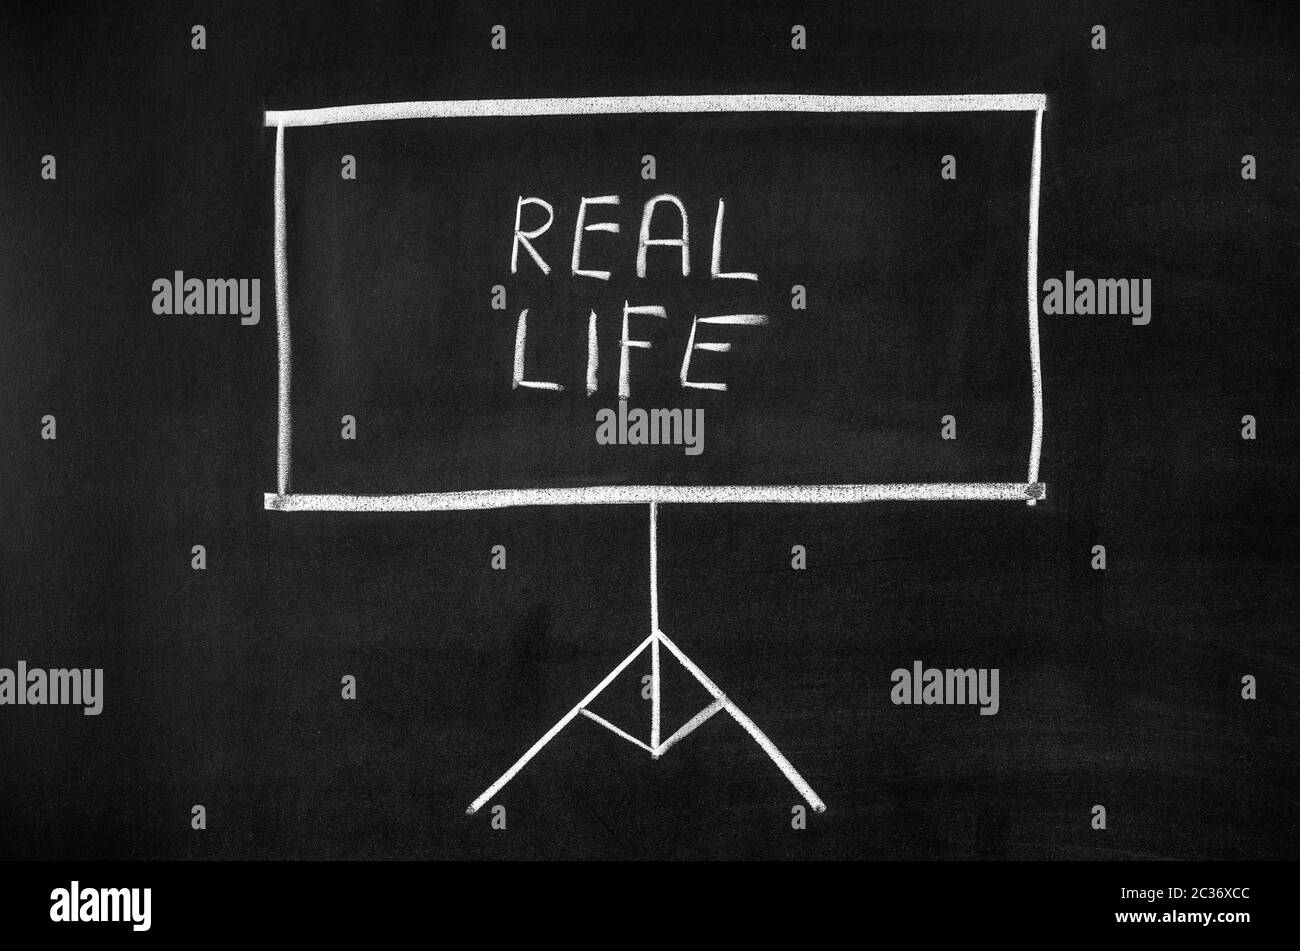 Projector screen drawn on the blackboard. The display shows text. Stock Photo